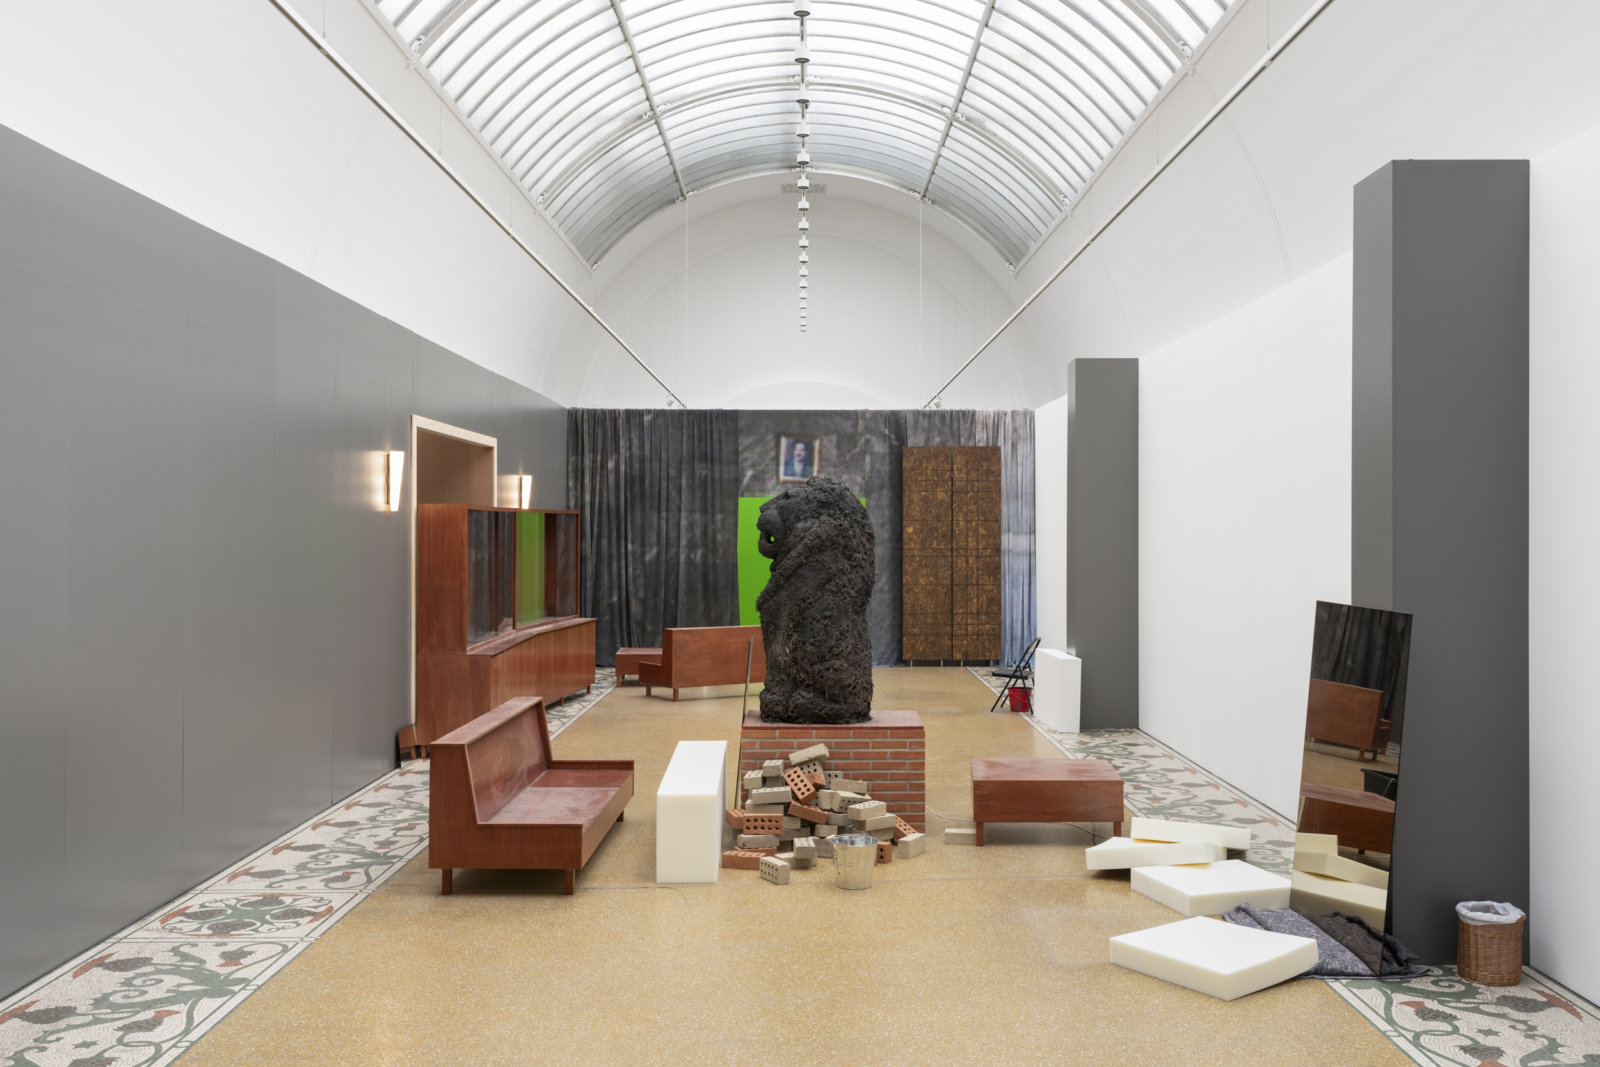 Abbas Akhavan, cast for a folly, 2019/2023, museum vitrines, benches, false doorway, digitally printed sharkstooth scrim fabric wall, green screen, mirrors, sconces, oscillating fan, chairs, plastic bucket, air conditioner, open cell foam cushions, moving blanket, clay bricks, pump, water lilies, dolly, straw, sand, plywood, mortar, dimensions variable. Installation view, curtain call, Ny Carlsberg Glyptotek, Copenhagen, Denmark, 2023